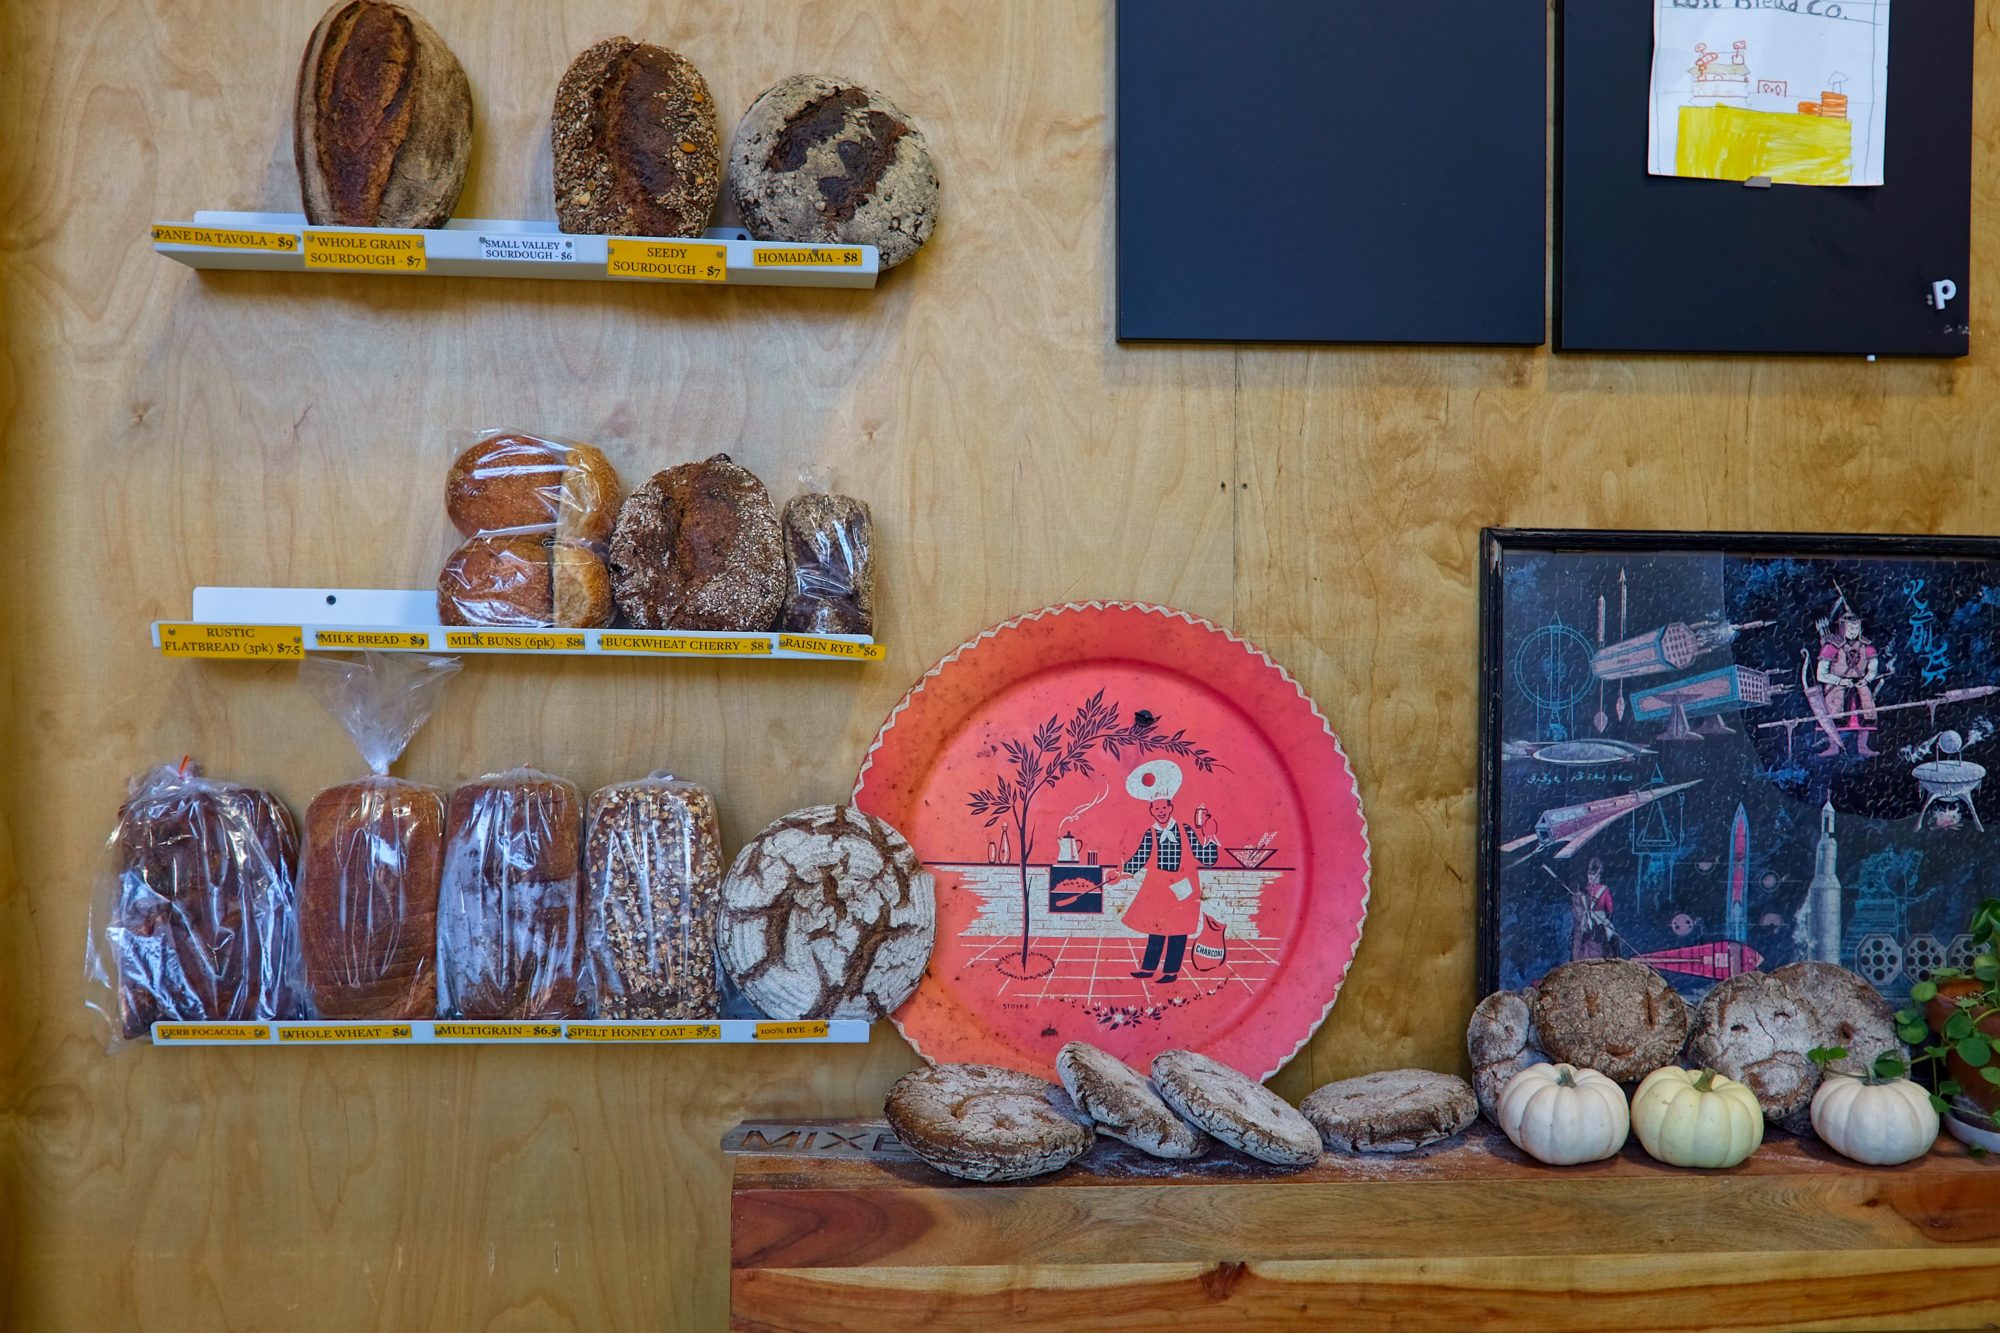 Bread on display at Lost Bread Co.